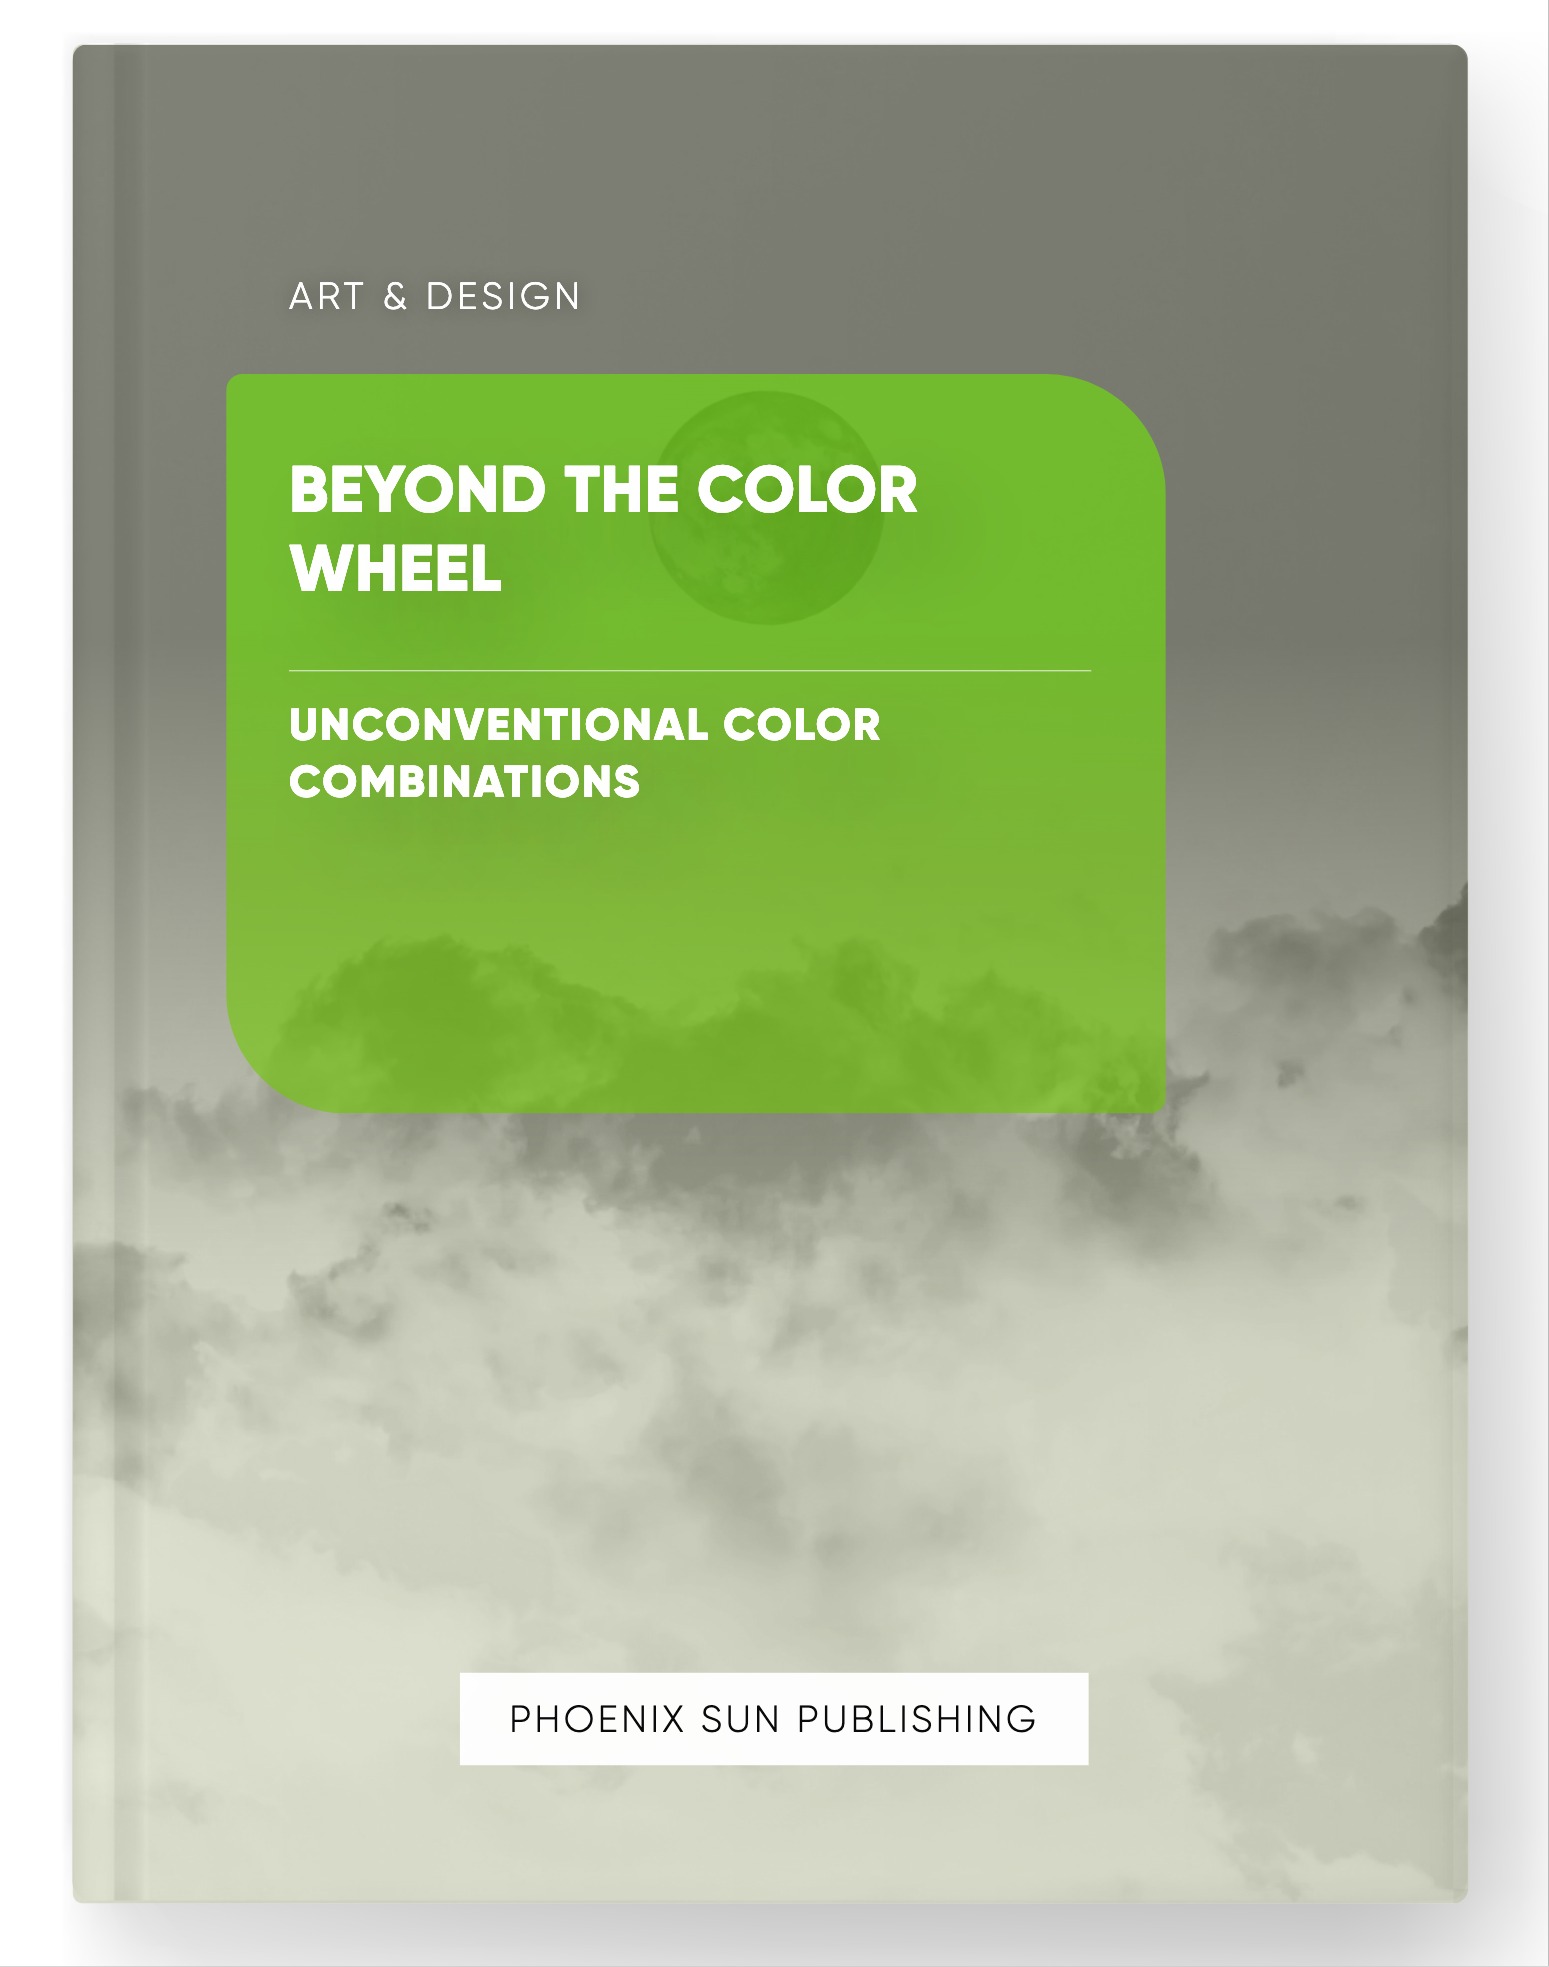 Beyond the Color Wheel – Unconventional Color Combinations